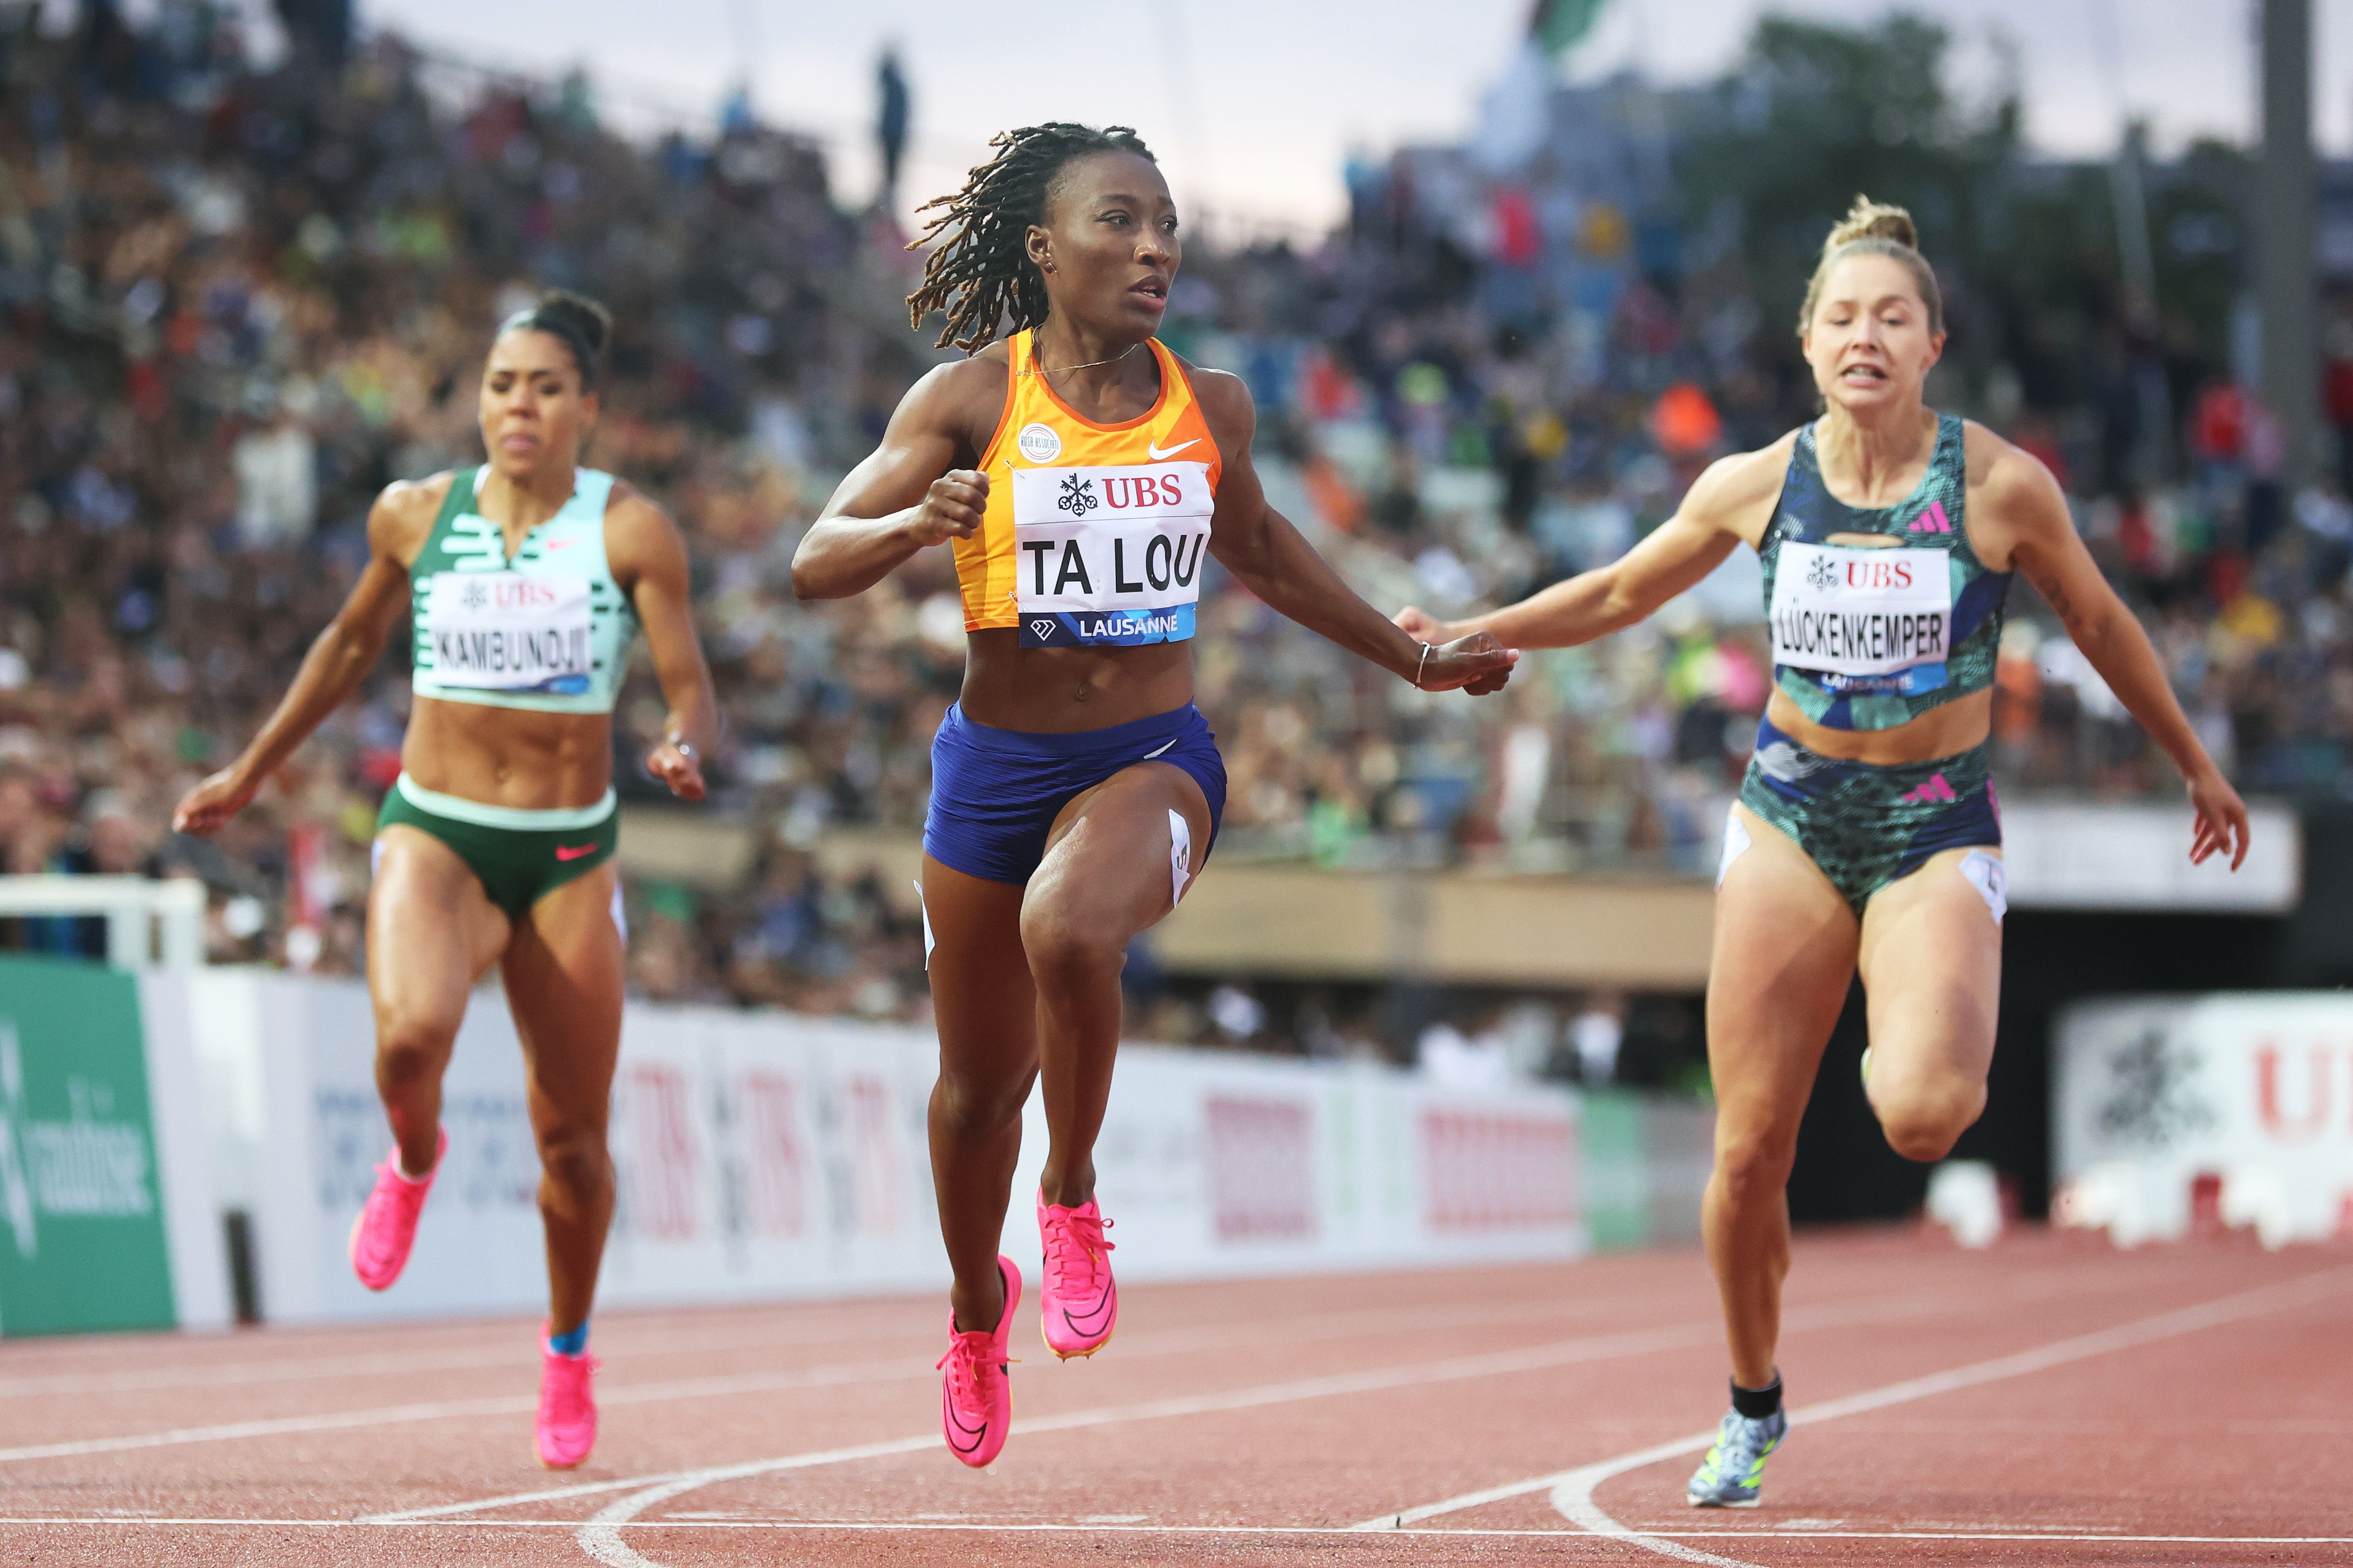 Marie-Josee Ta Lou wins the 100m in Lausanne